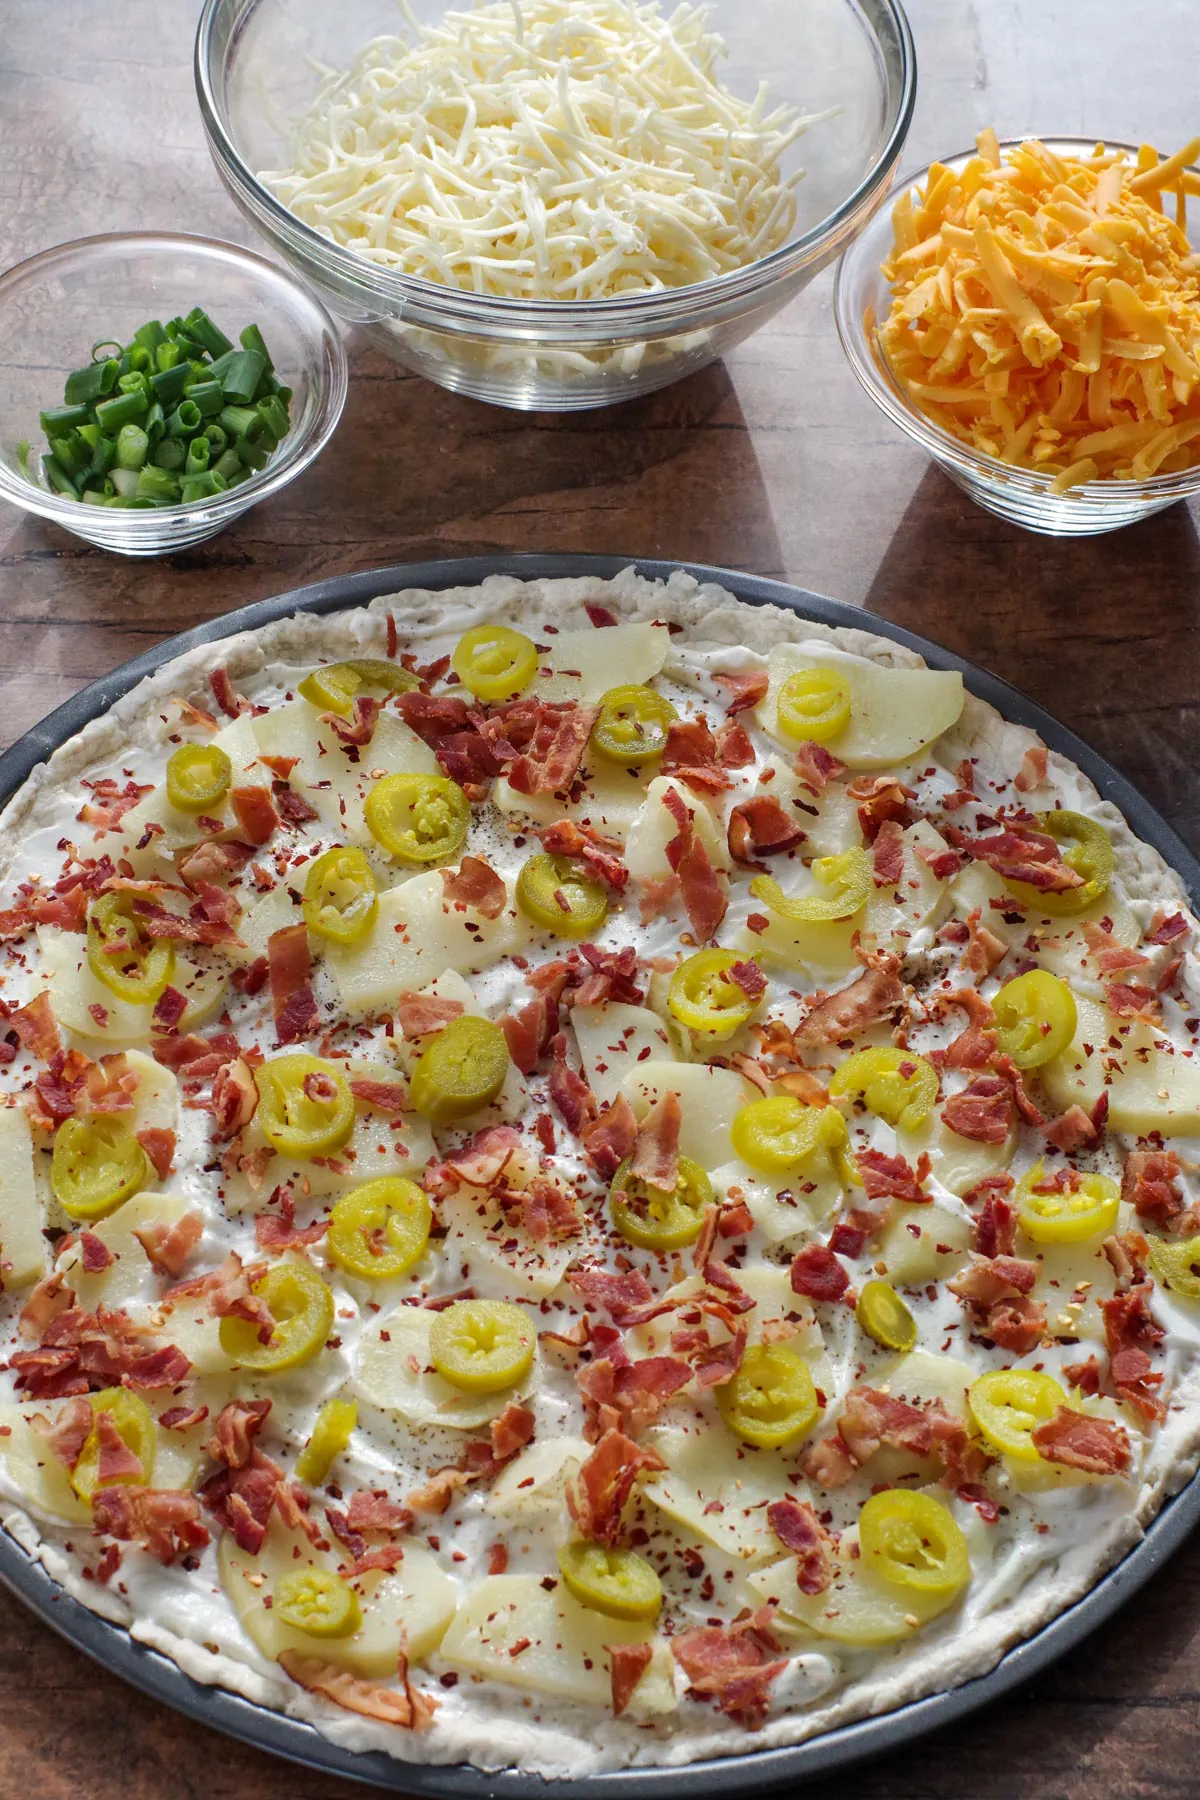 cactus cut potatoes, jalapenos, and bacon on top of sour cream covered pizza dough chili flakes,